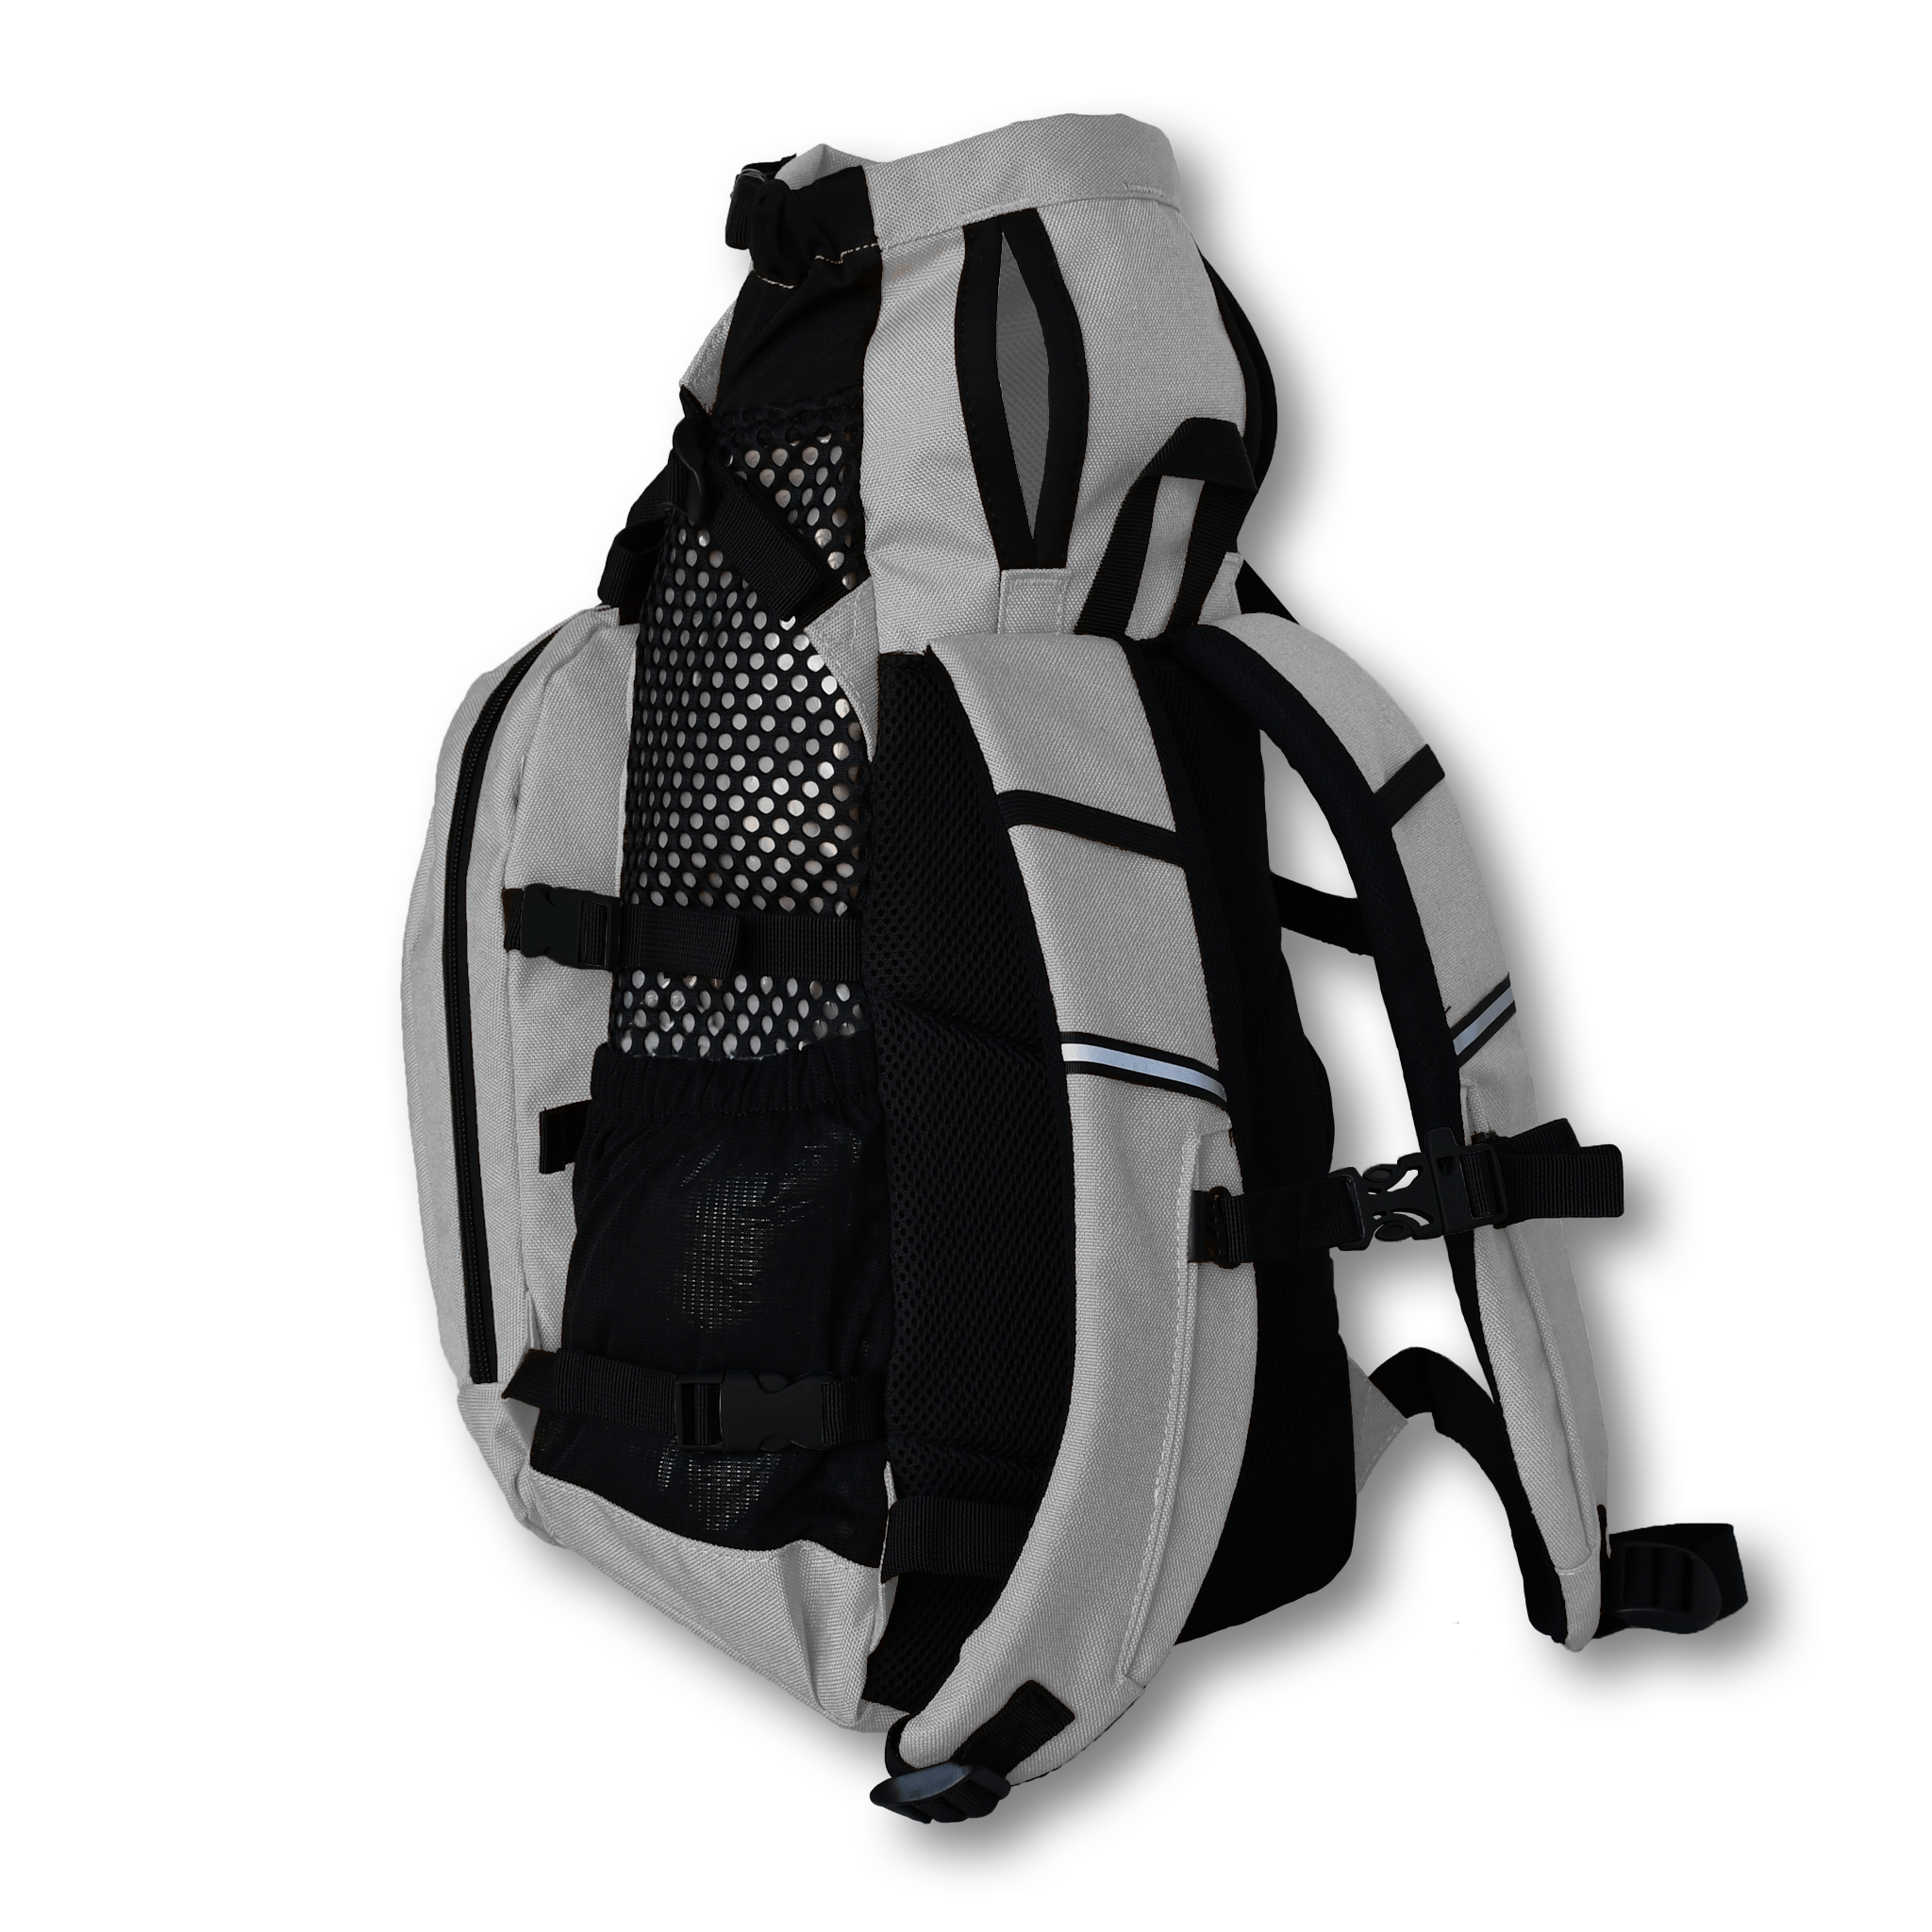 Plus 2 dog carrier gray angled Straps